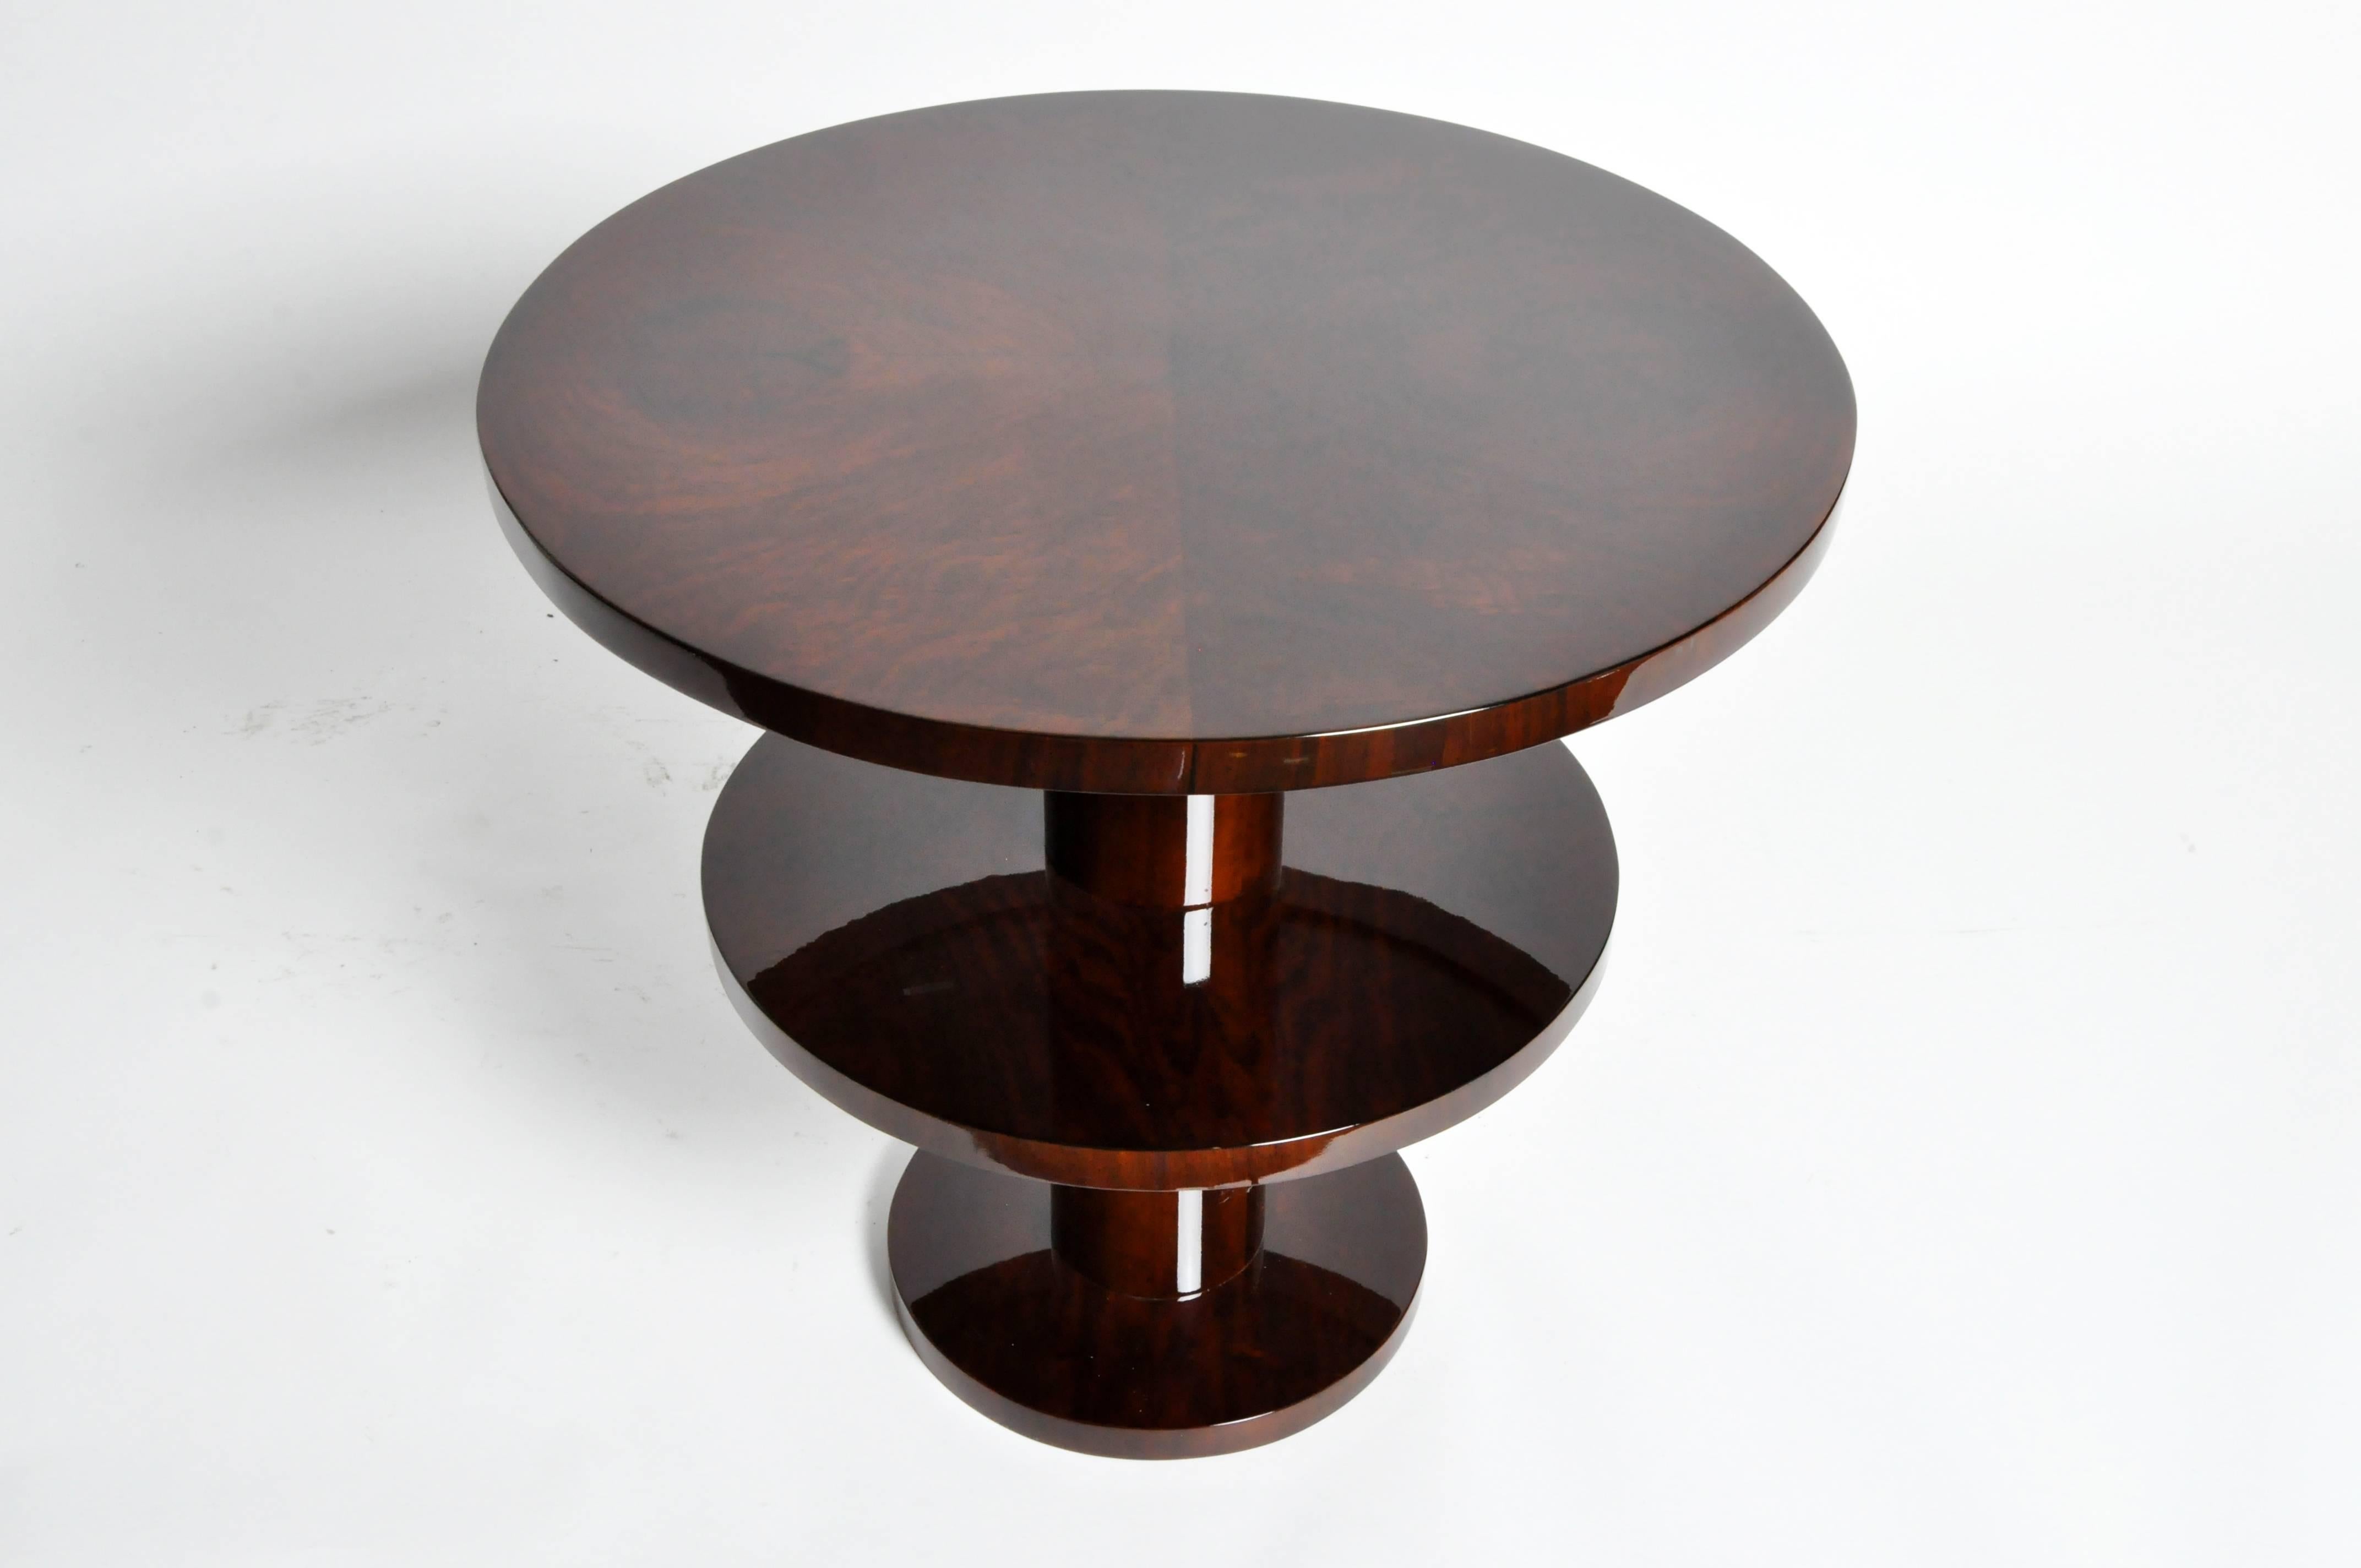 Hungarian Art Deco Style Round Table